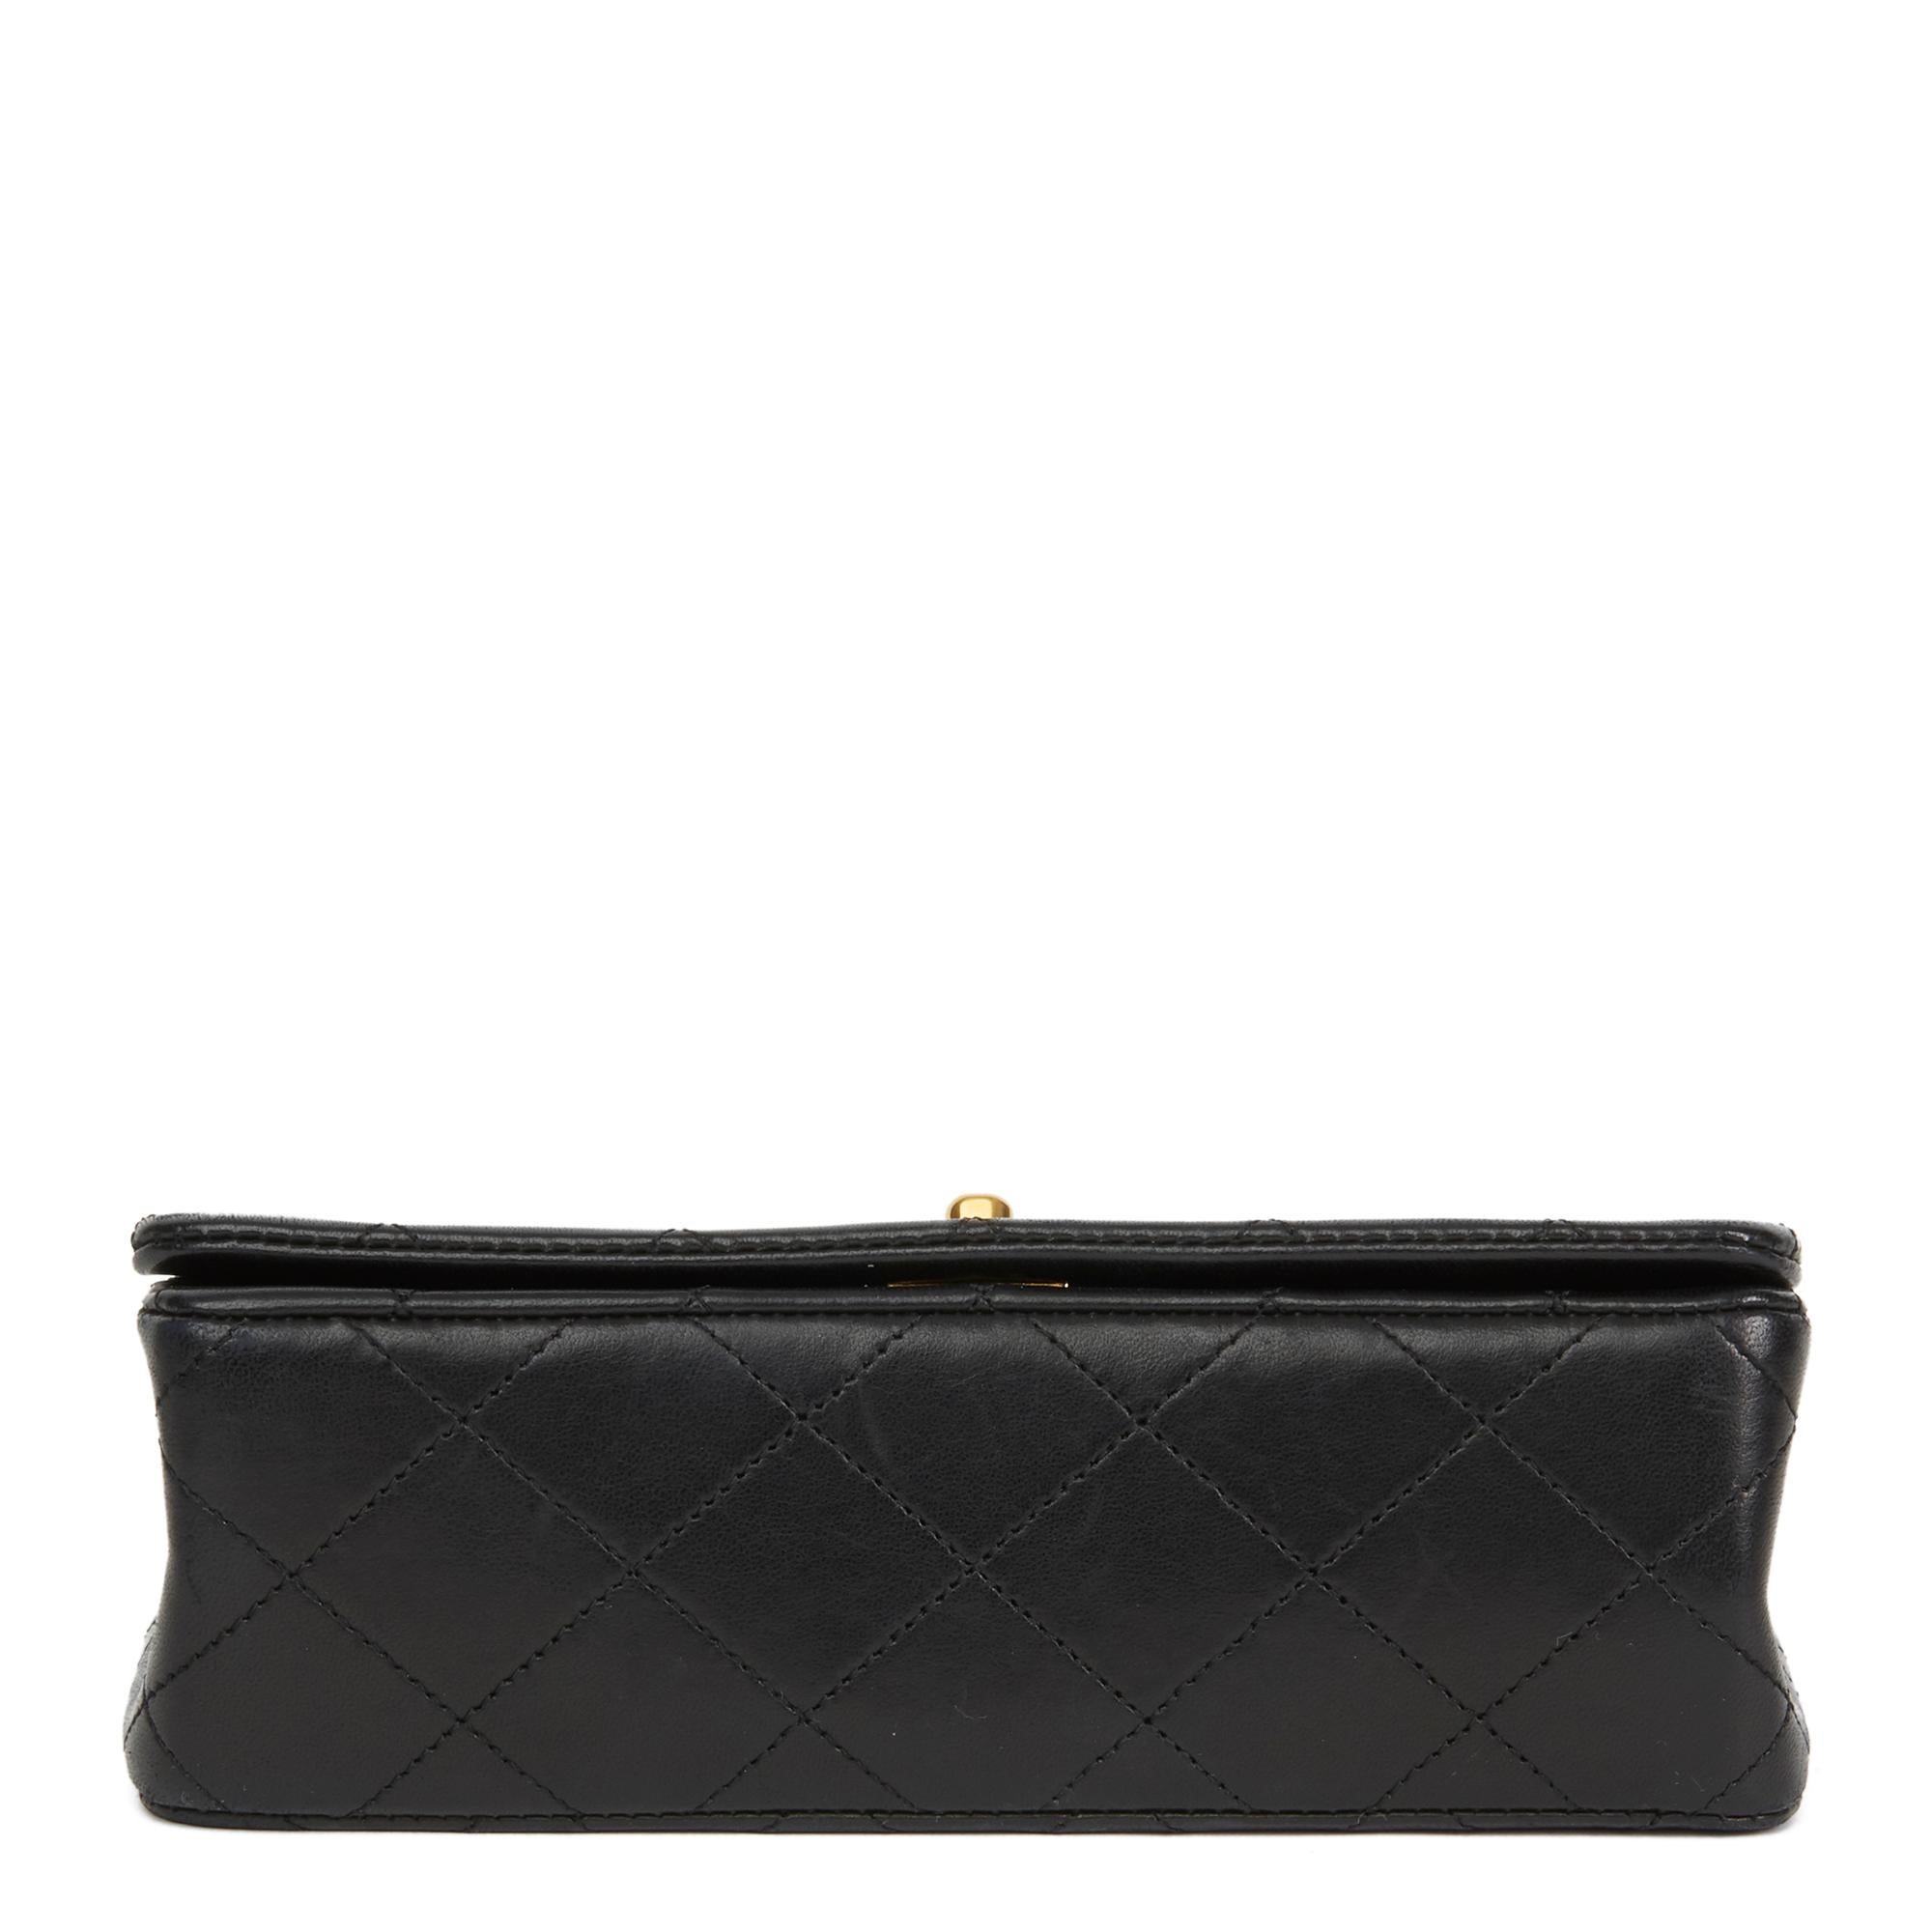 1990 Chanel Black Quilted Lambskin Vintage Mini Flap Bag 1